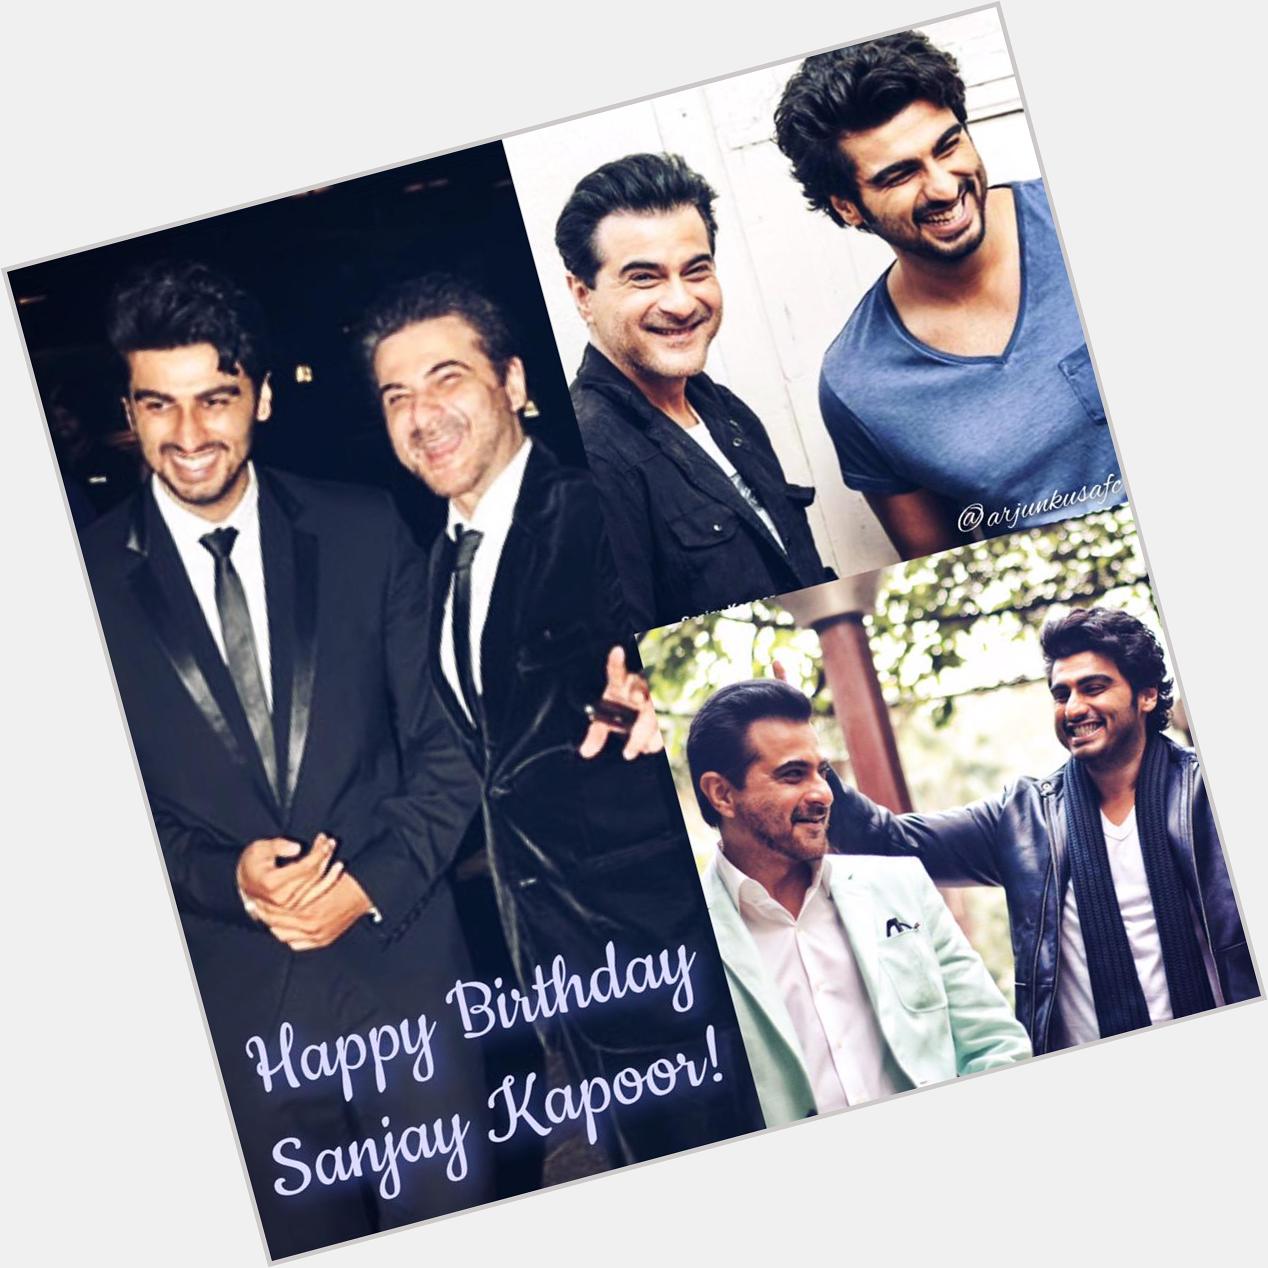 Here\s wishing a very happy birthday to Mr. Sanjay Kapoor!  Have a happy, healthy & blessed year ahead   